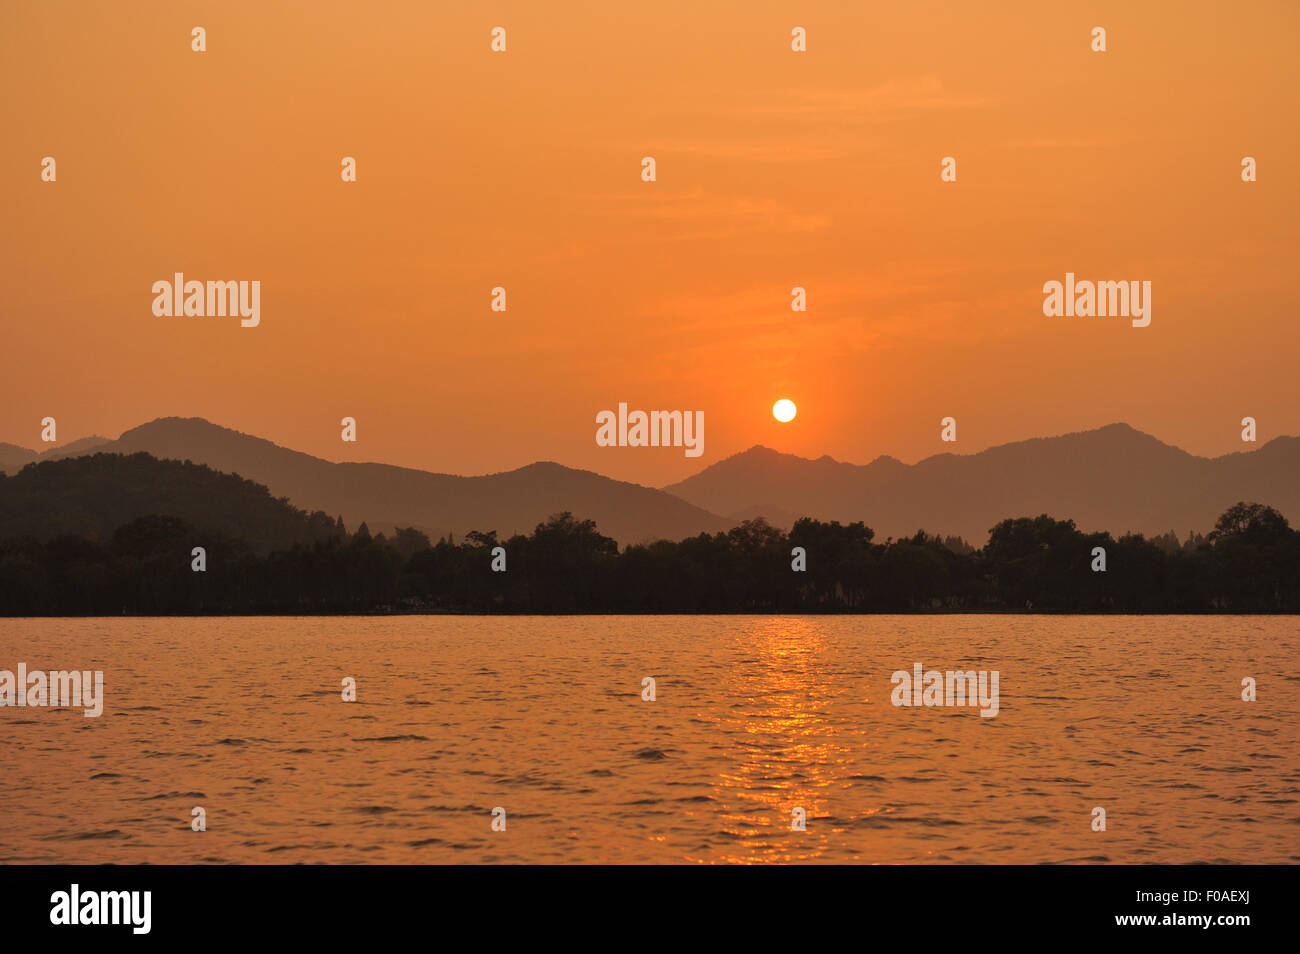 Sunset over lake, mountains in distance, Hangzhou, China Stock Photo